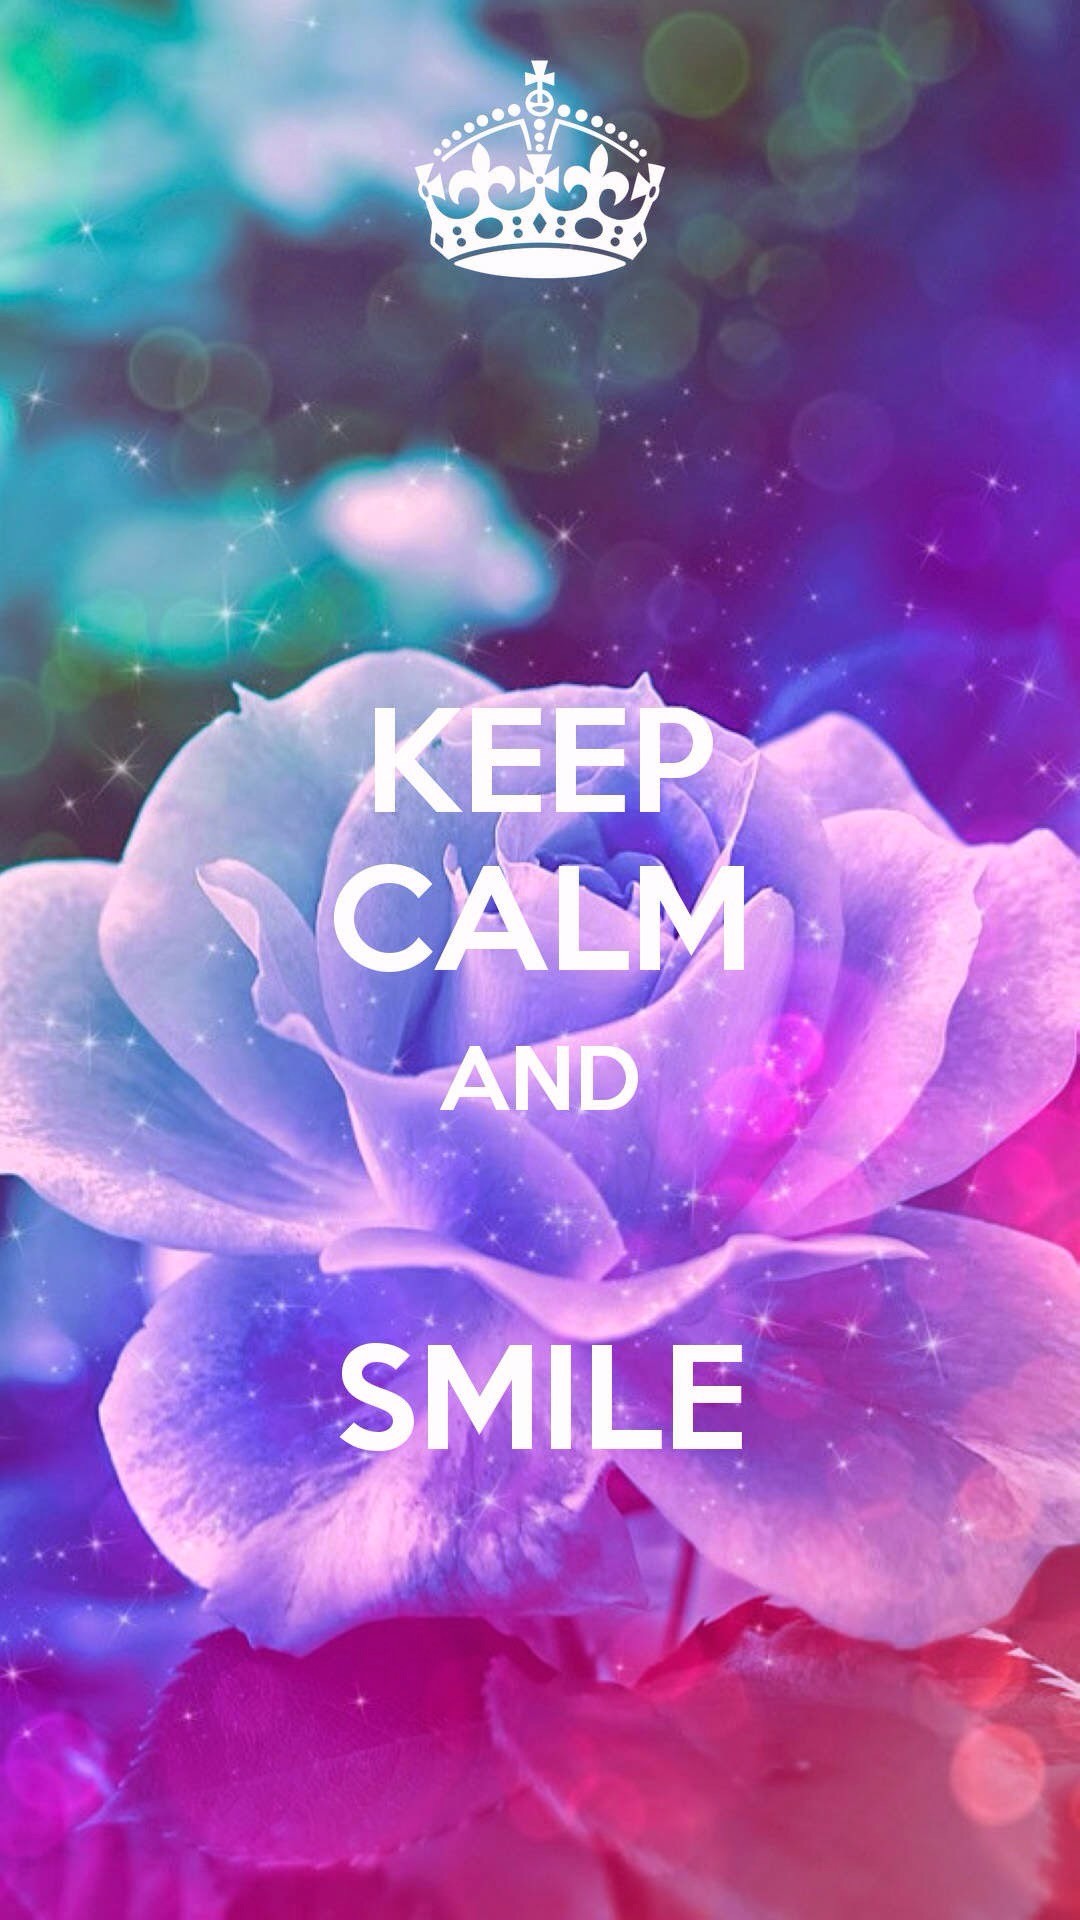 Keep Calm and smile - Quotes